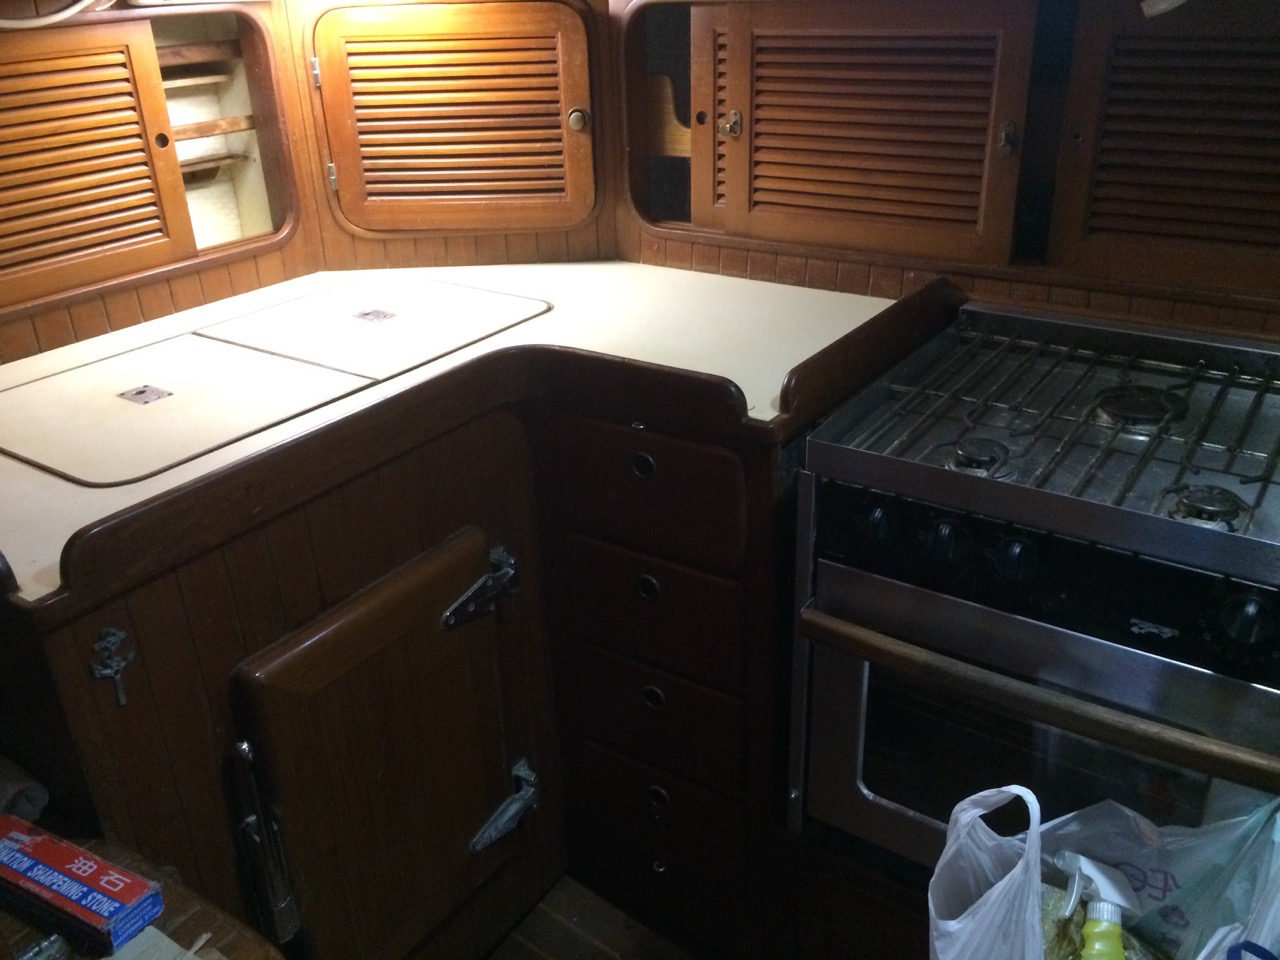 A cleaner Galley